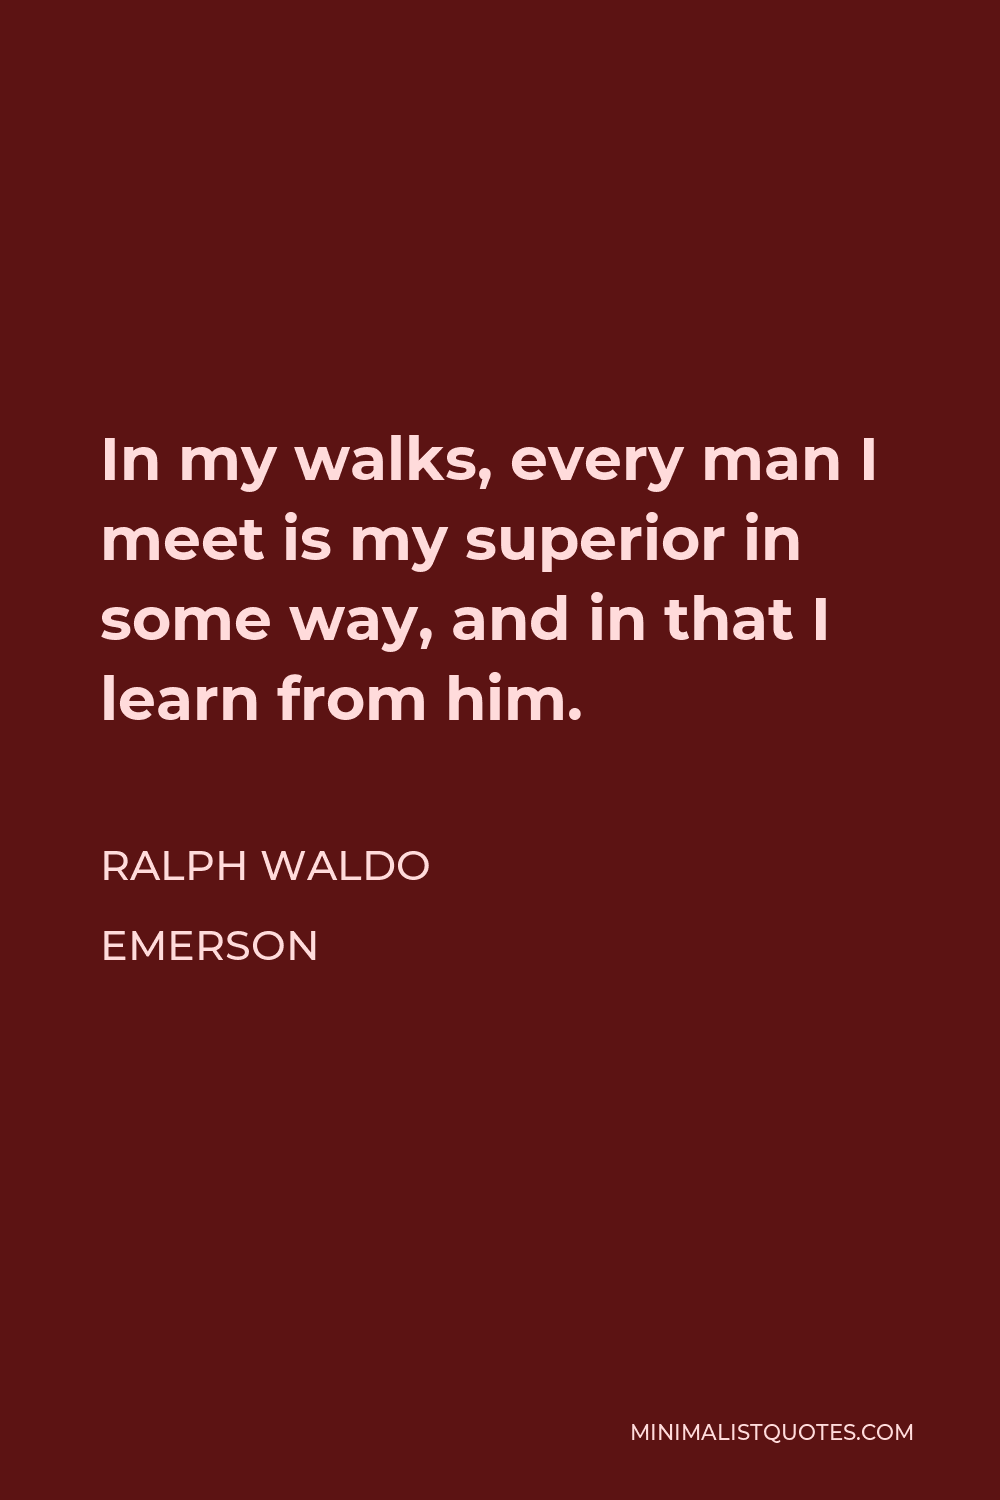 Ralph Waldo Emerson Quote - In my walks, every man I meet is my superior in some way, and in that I learn from him.